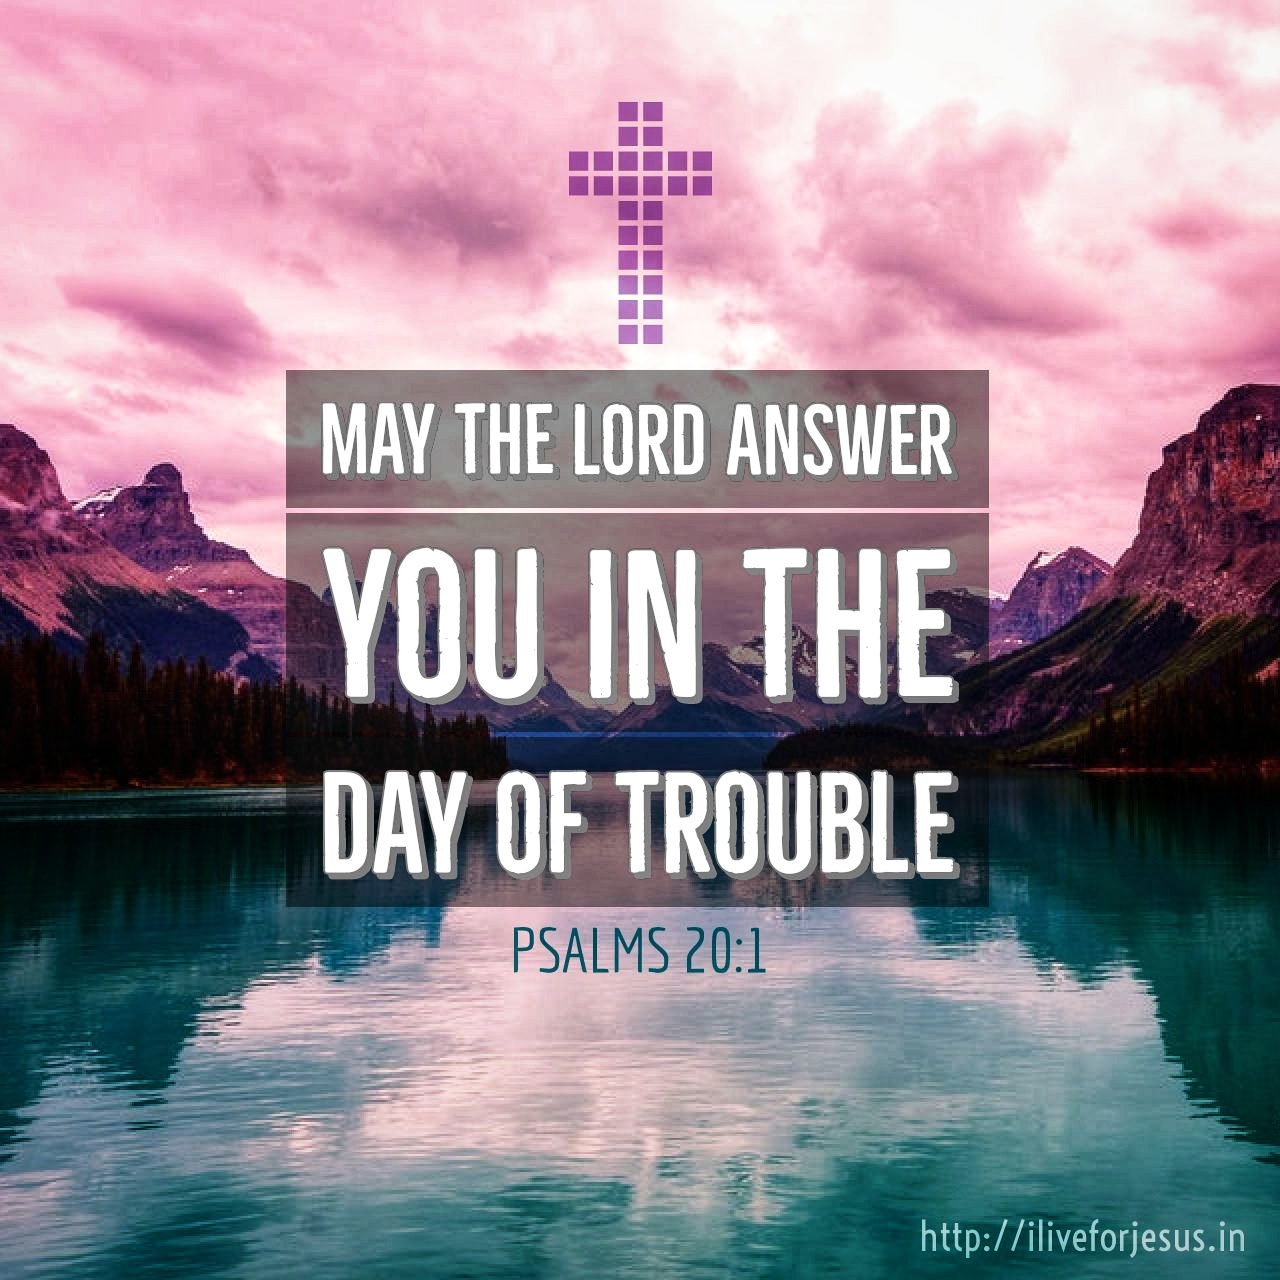 May the Lord answer you in the day of trouble. Psalms 20:1